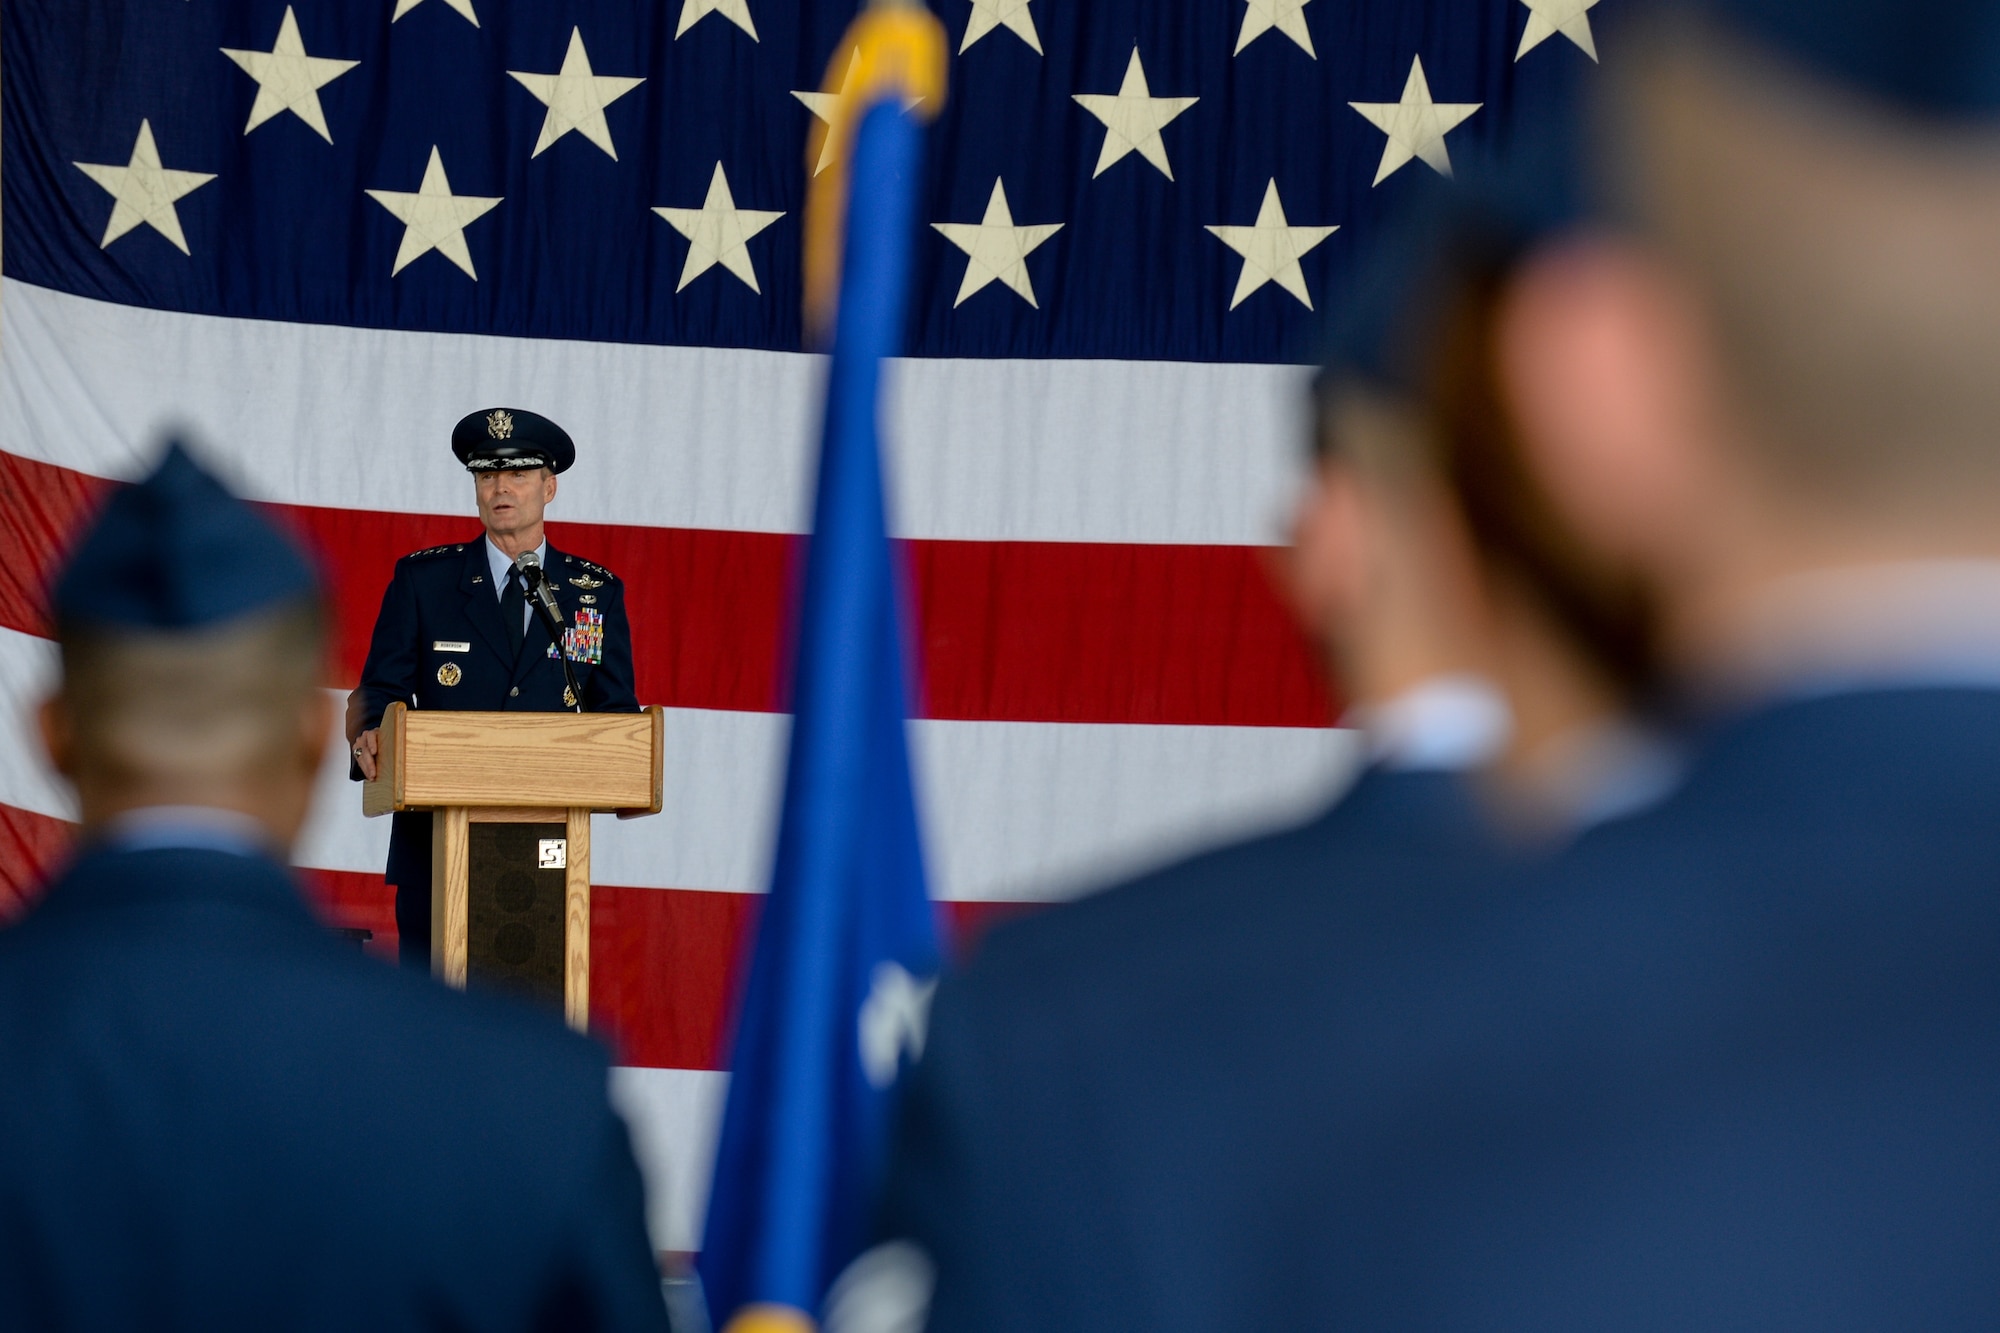 Lt. Gen. Darryl Roberson, Third Air Force and 17th Expeditionary Air Force outgoing commander gives his final speech during a change of command ceremony July 2, 2015, at Ramstein Air Base, Germany.  Before relinquishing command to Lt. Gen. Timothy M. Ray, he spoke of his experiences in his position as well as thanking commanders and Airmen for a job well done. (U.S. Air Force photo/Senior Airman Nicole Sikorski)